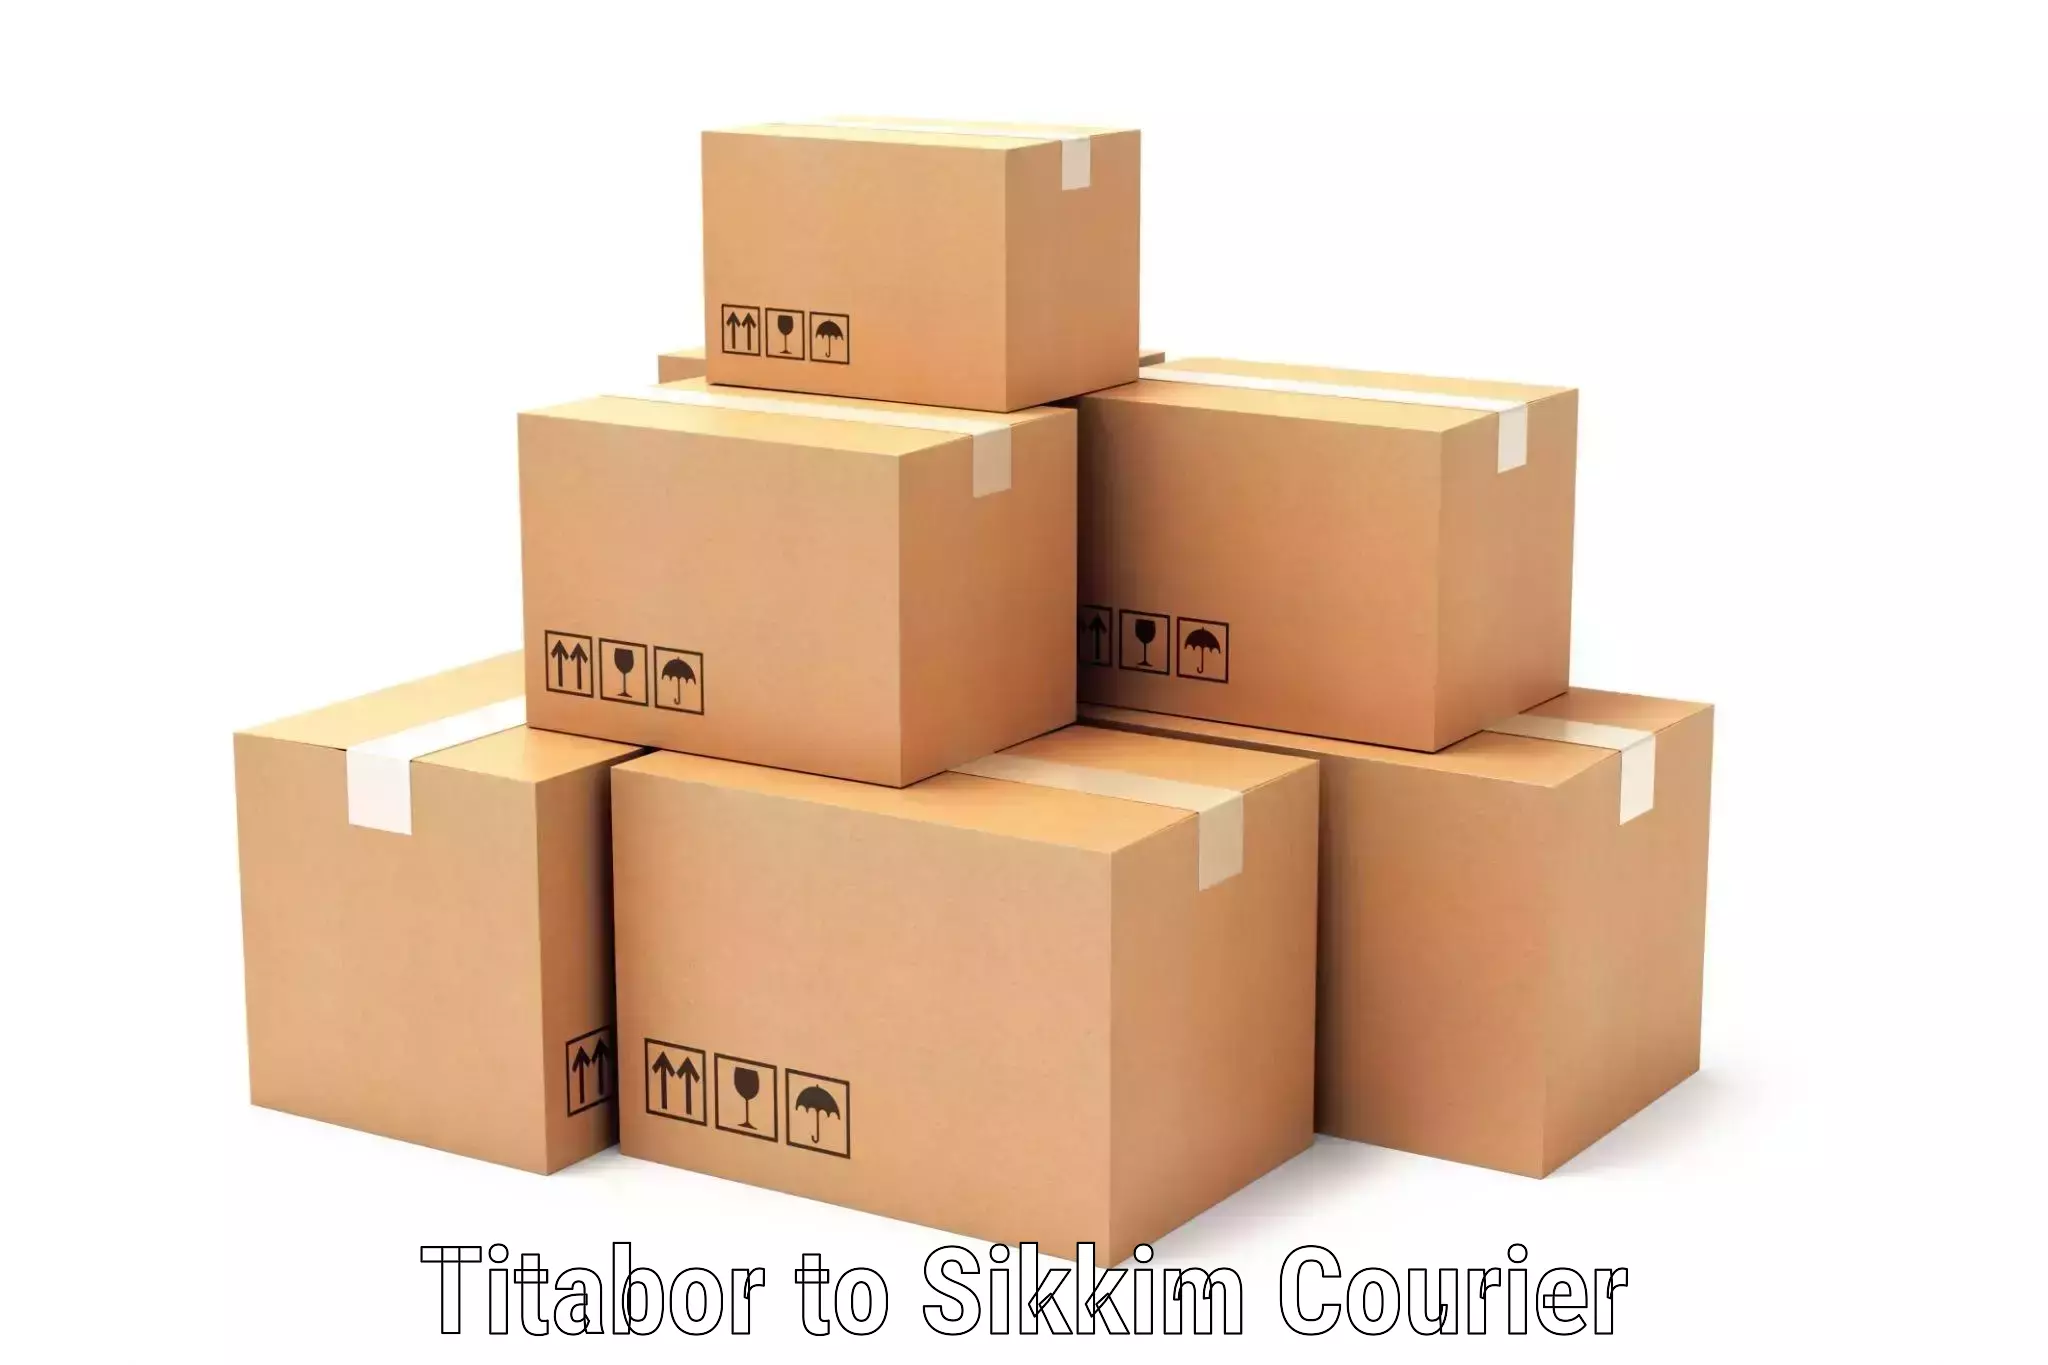 Nationwide shipping capabilities Titabor to Sikkim